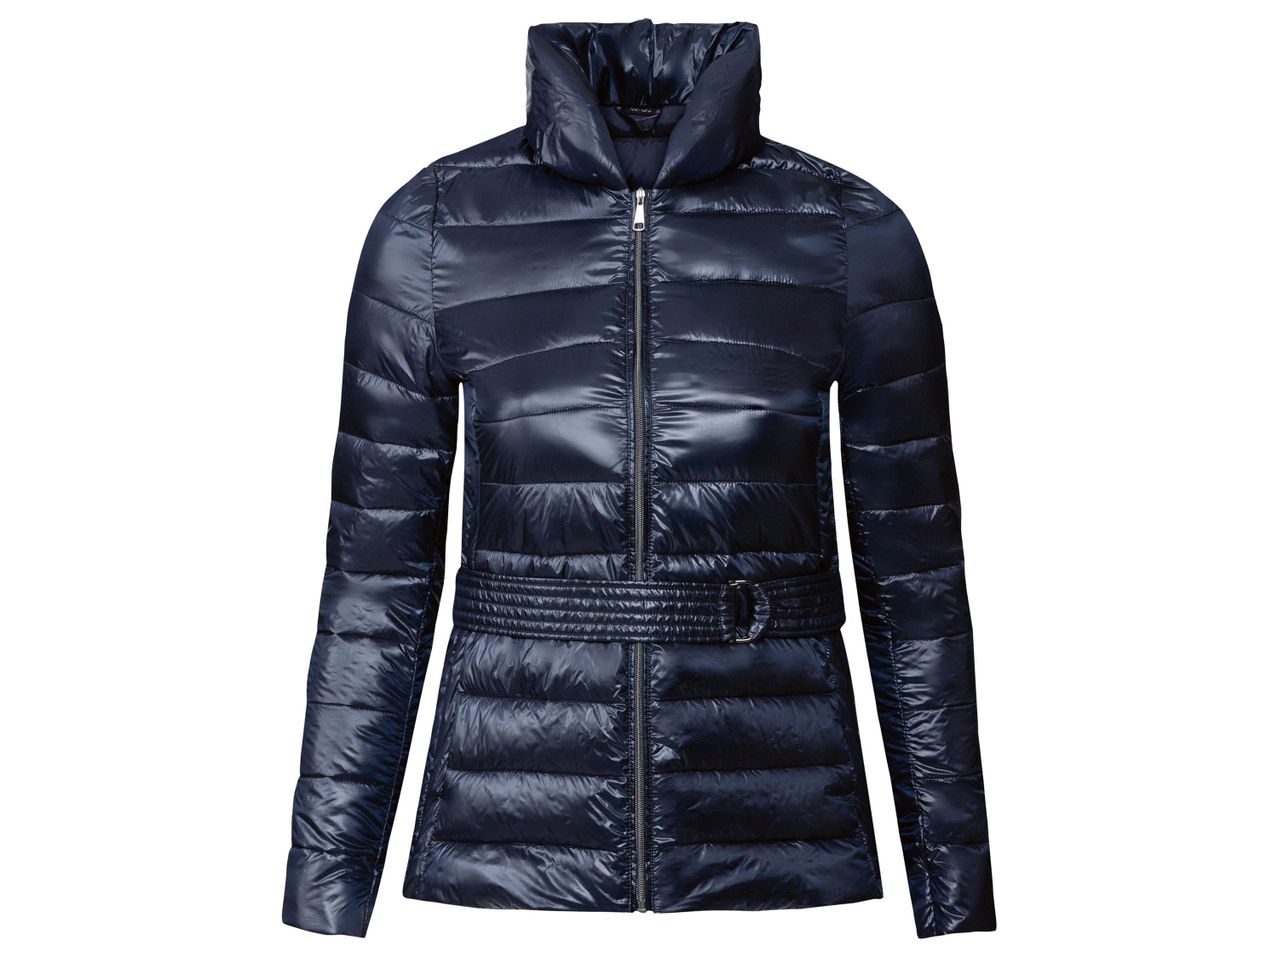 Go to full screen view: Ladies’ Lightweight Belted Jacket - Image 1